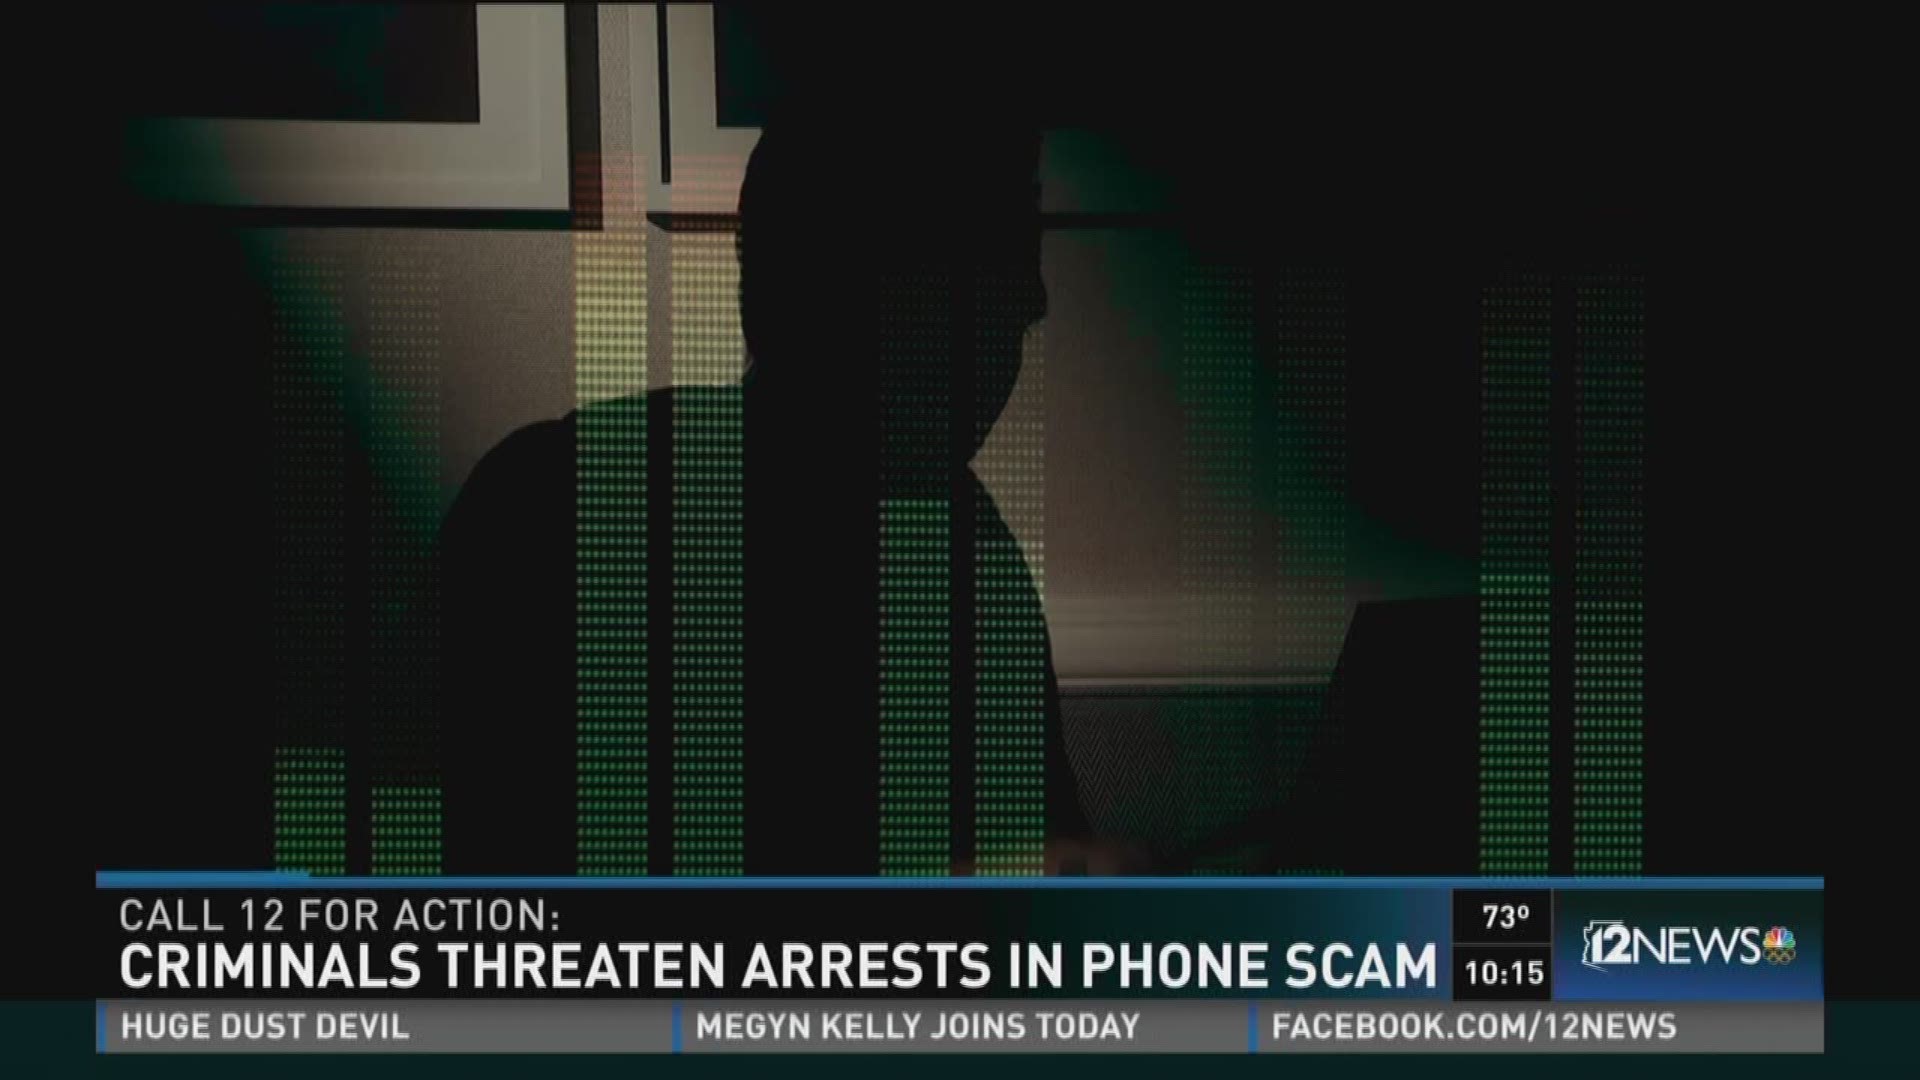 Although it's not tax time, scammers are still pretending to be the IRS and threatening to arrest people.